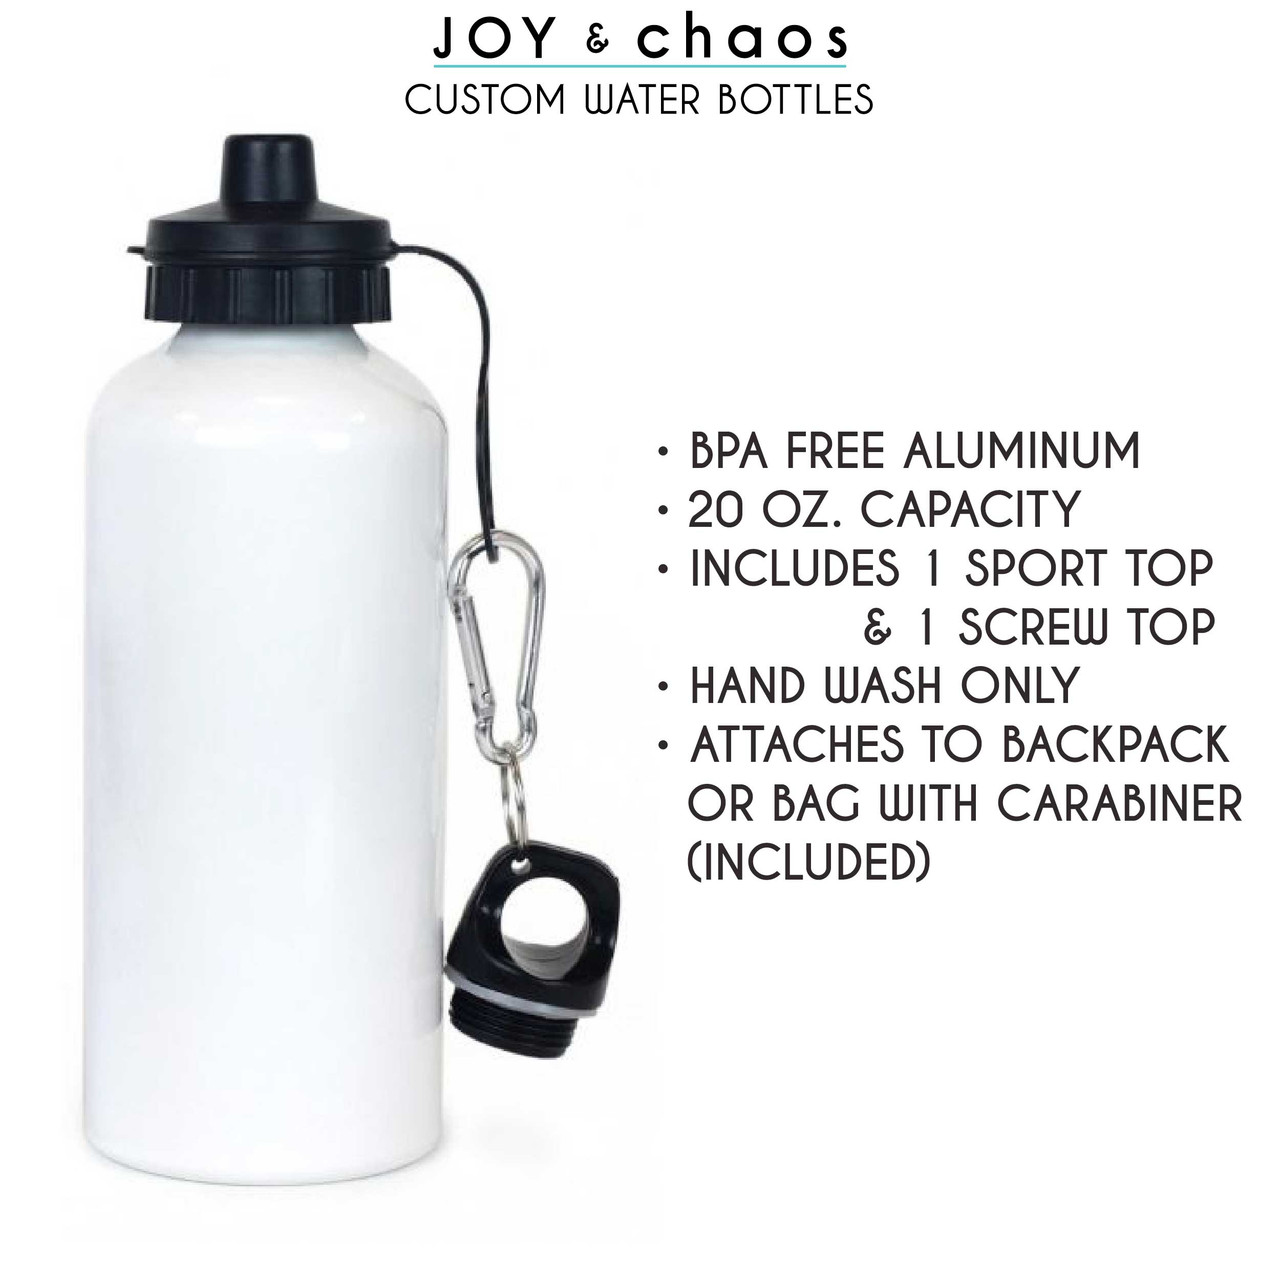 https://cdn11.bigcommerce.com/s-5grzuu6/images/stencil/1280x1280/products/4692/48875/Personalized-Aluminum-Water-Bottles-Joy--Chaos__05289.1658865192.jpg?c=2